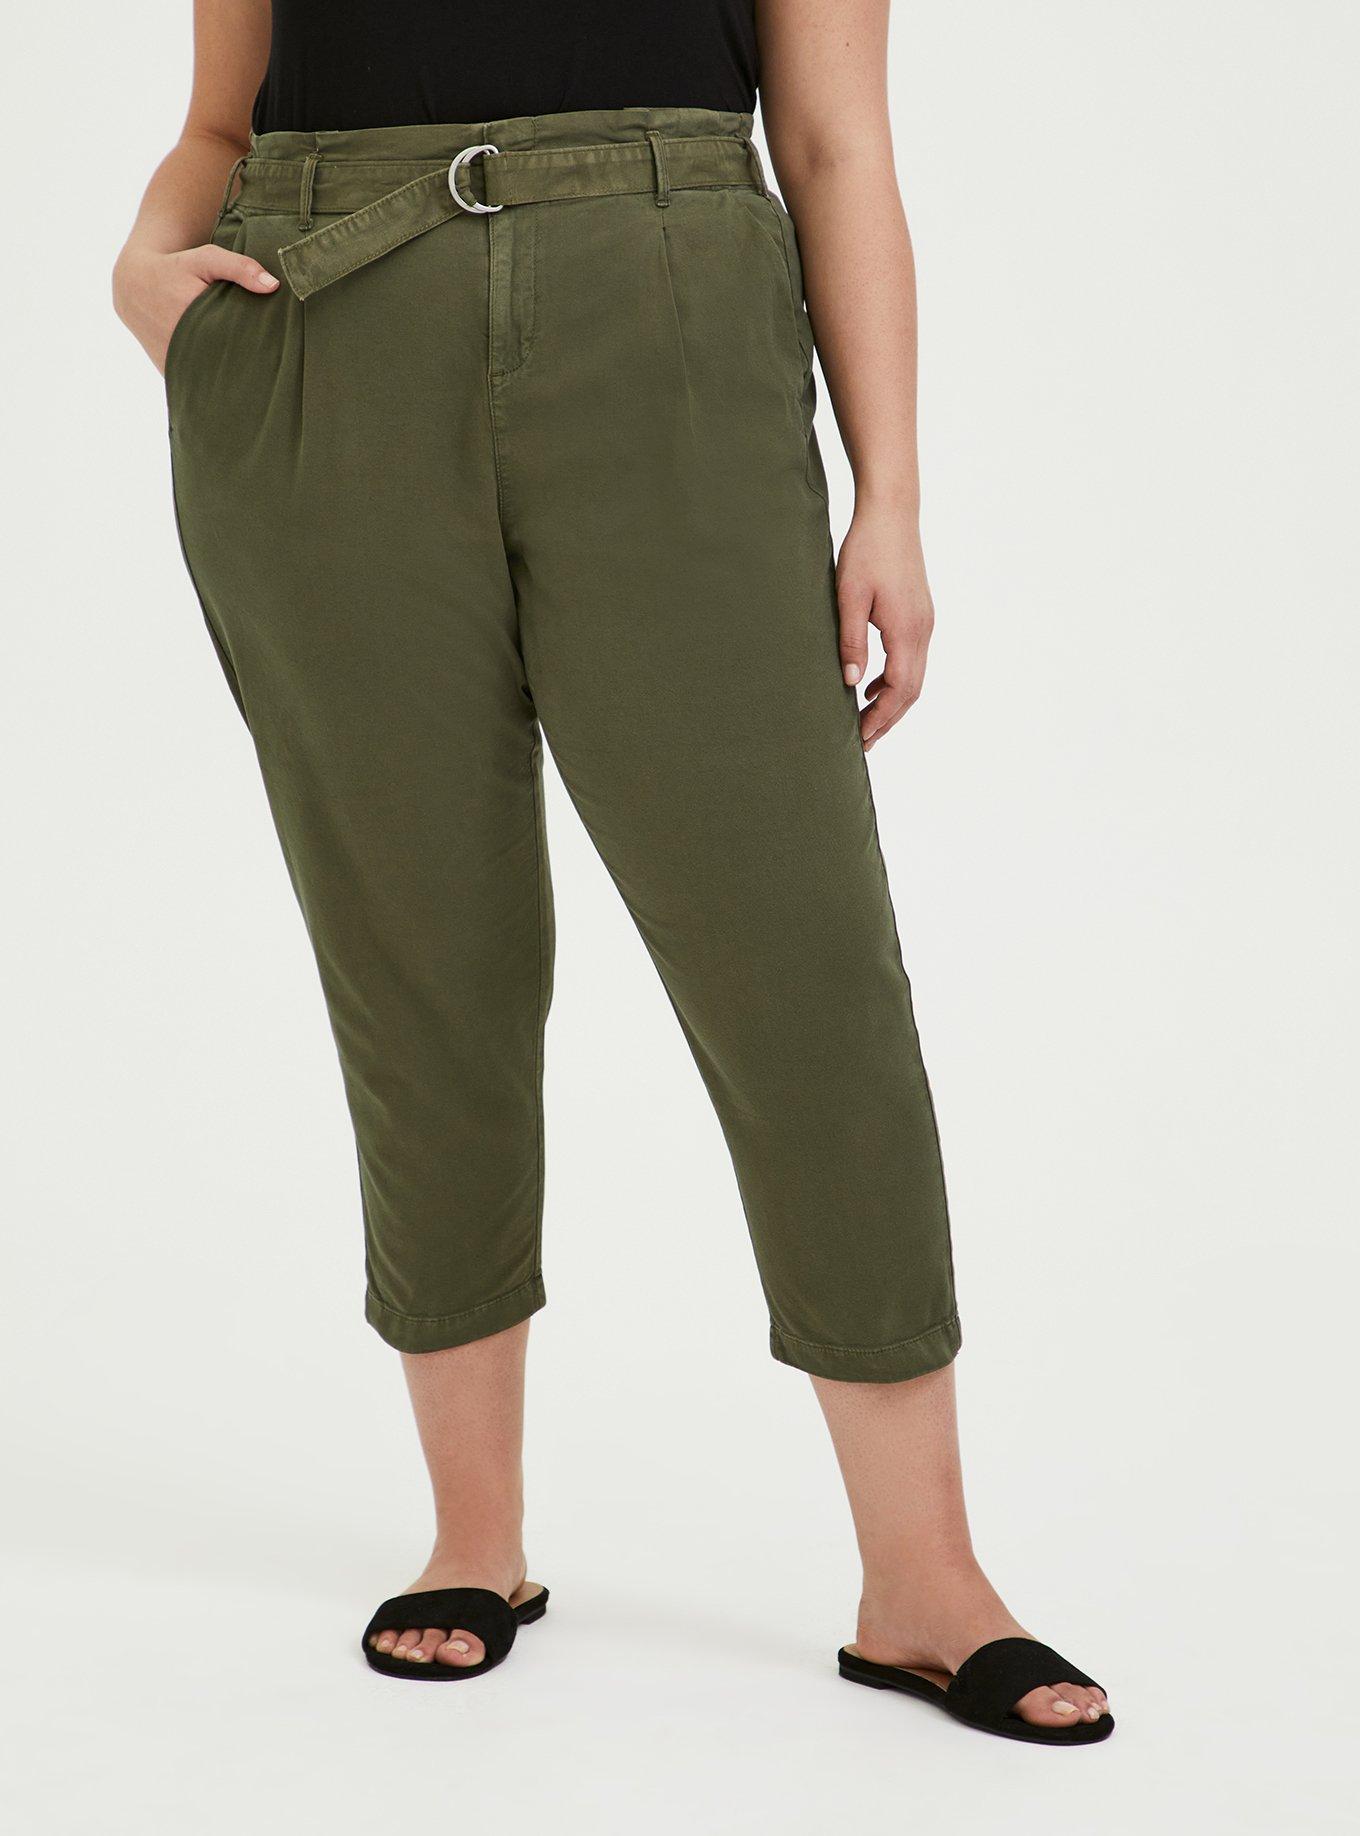 Plus Size - Olive Green Canvas Belted Crop Pant - Torrid